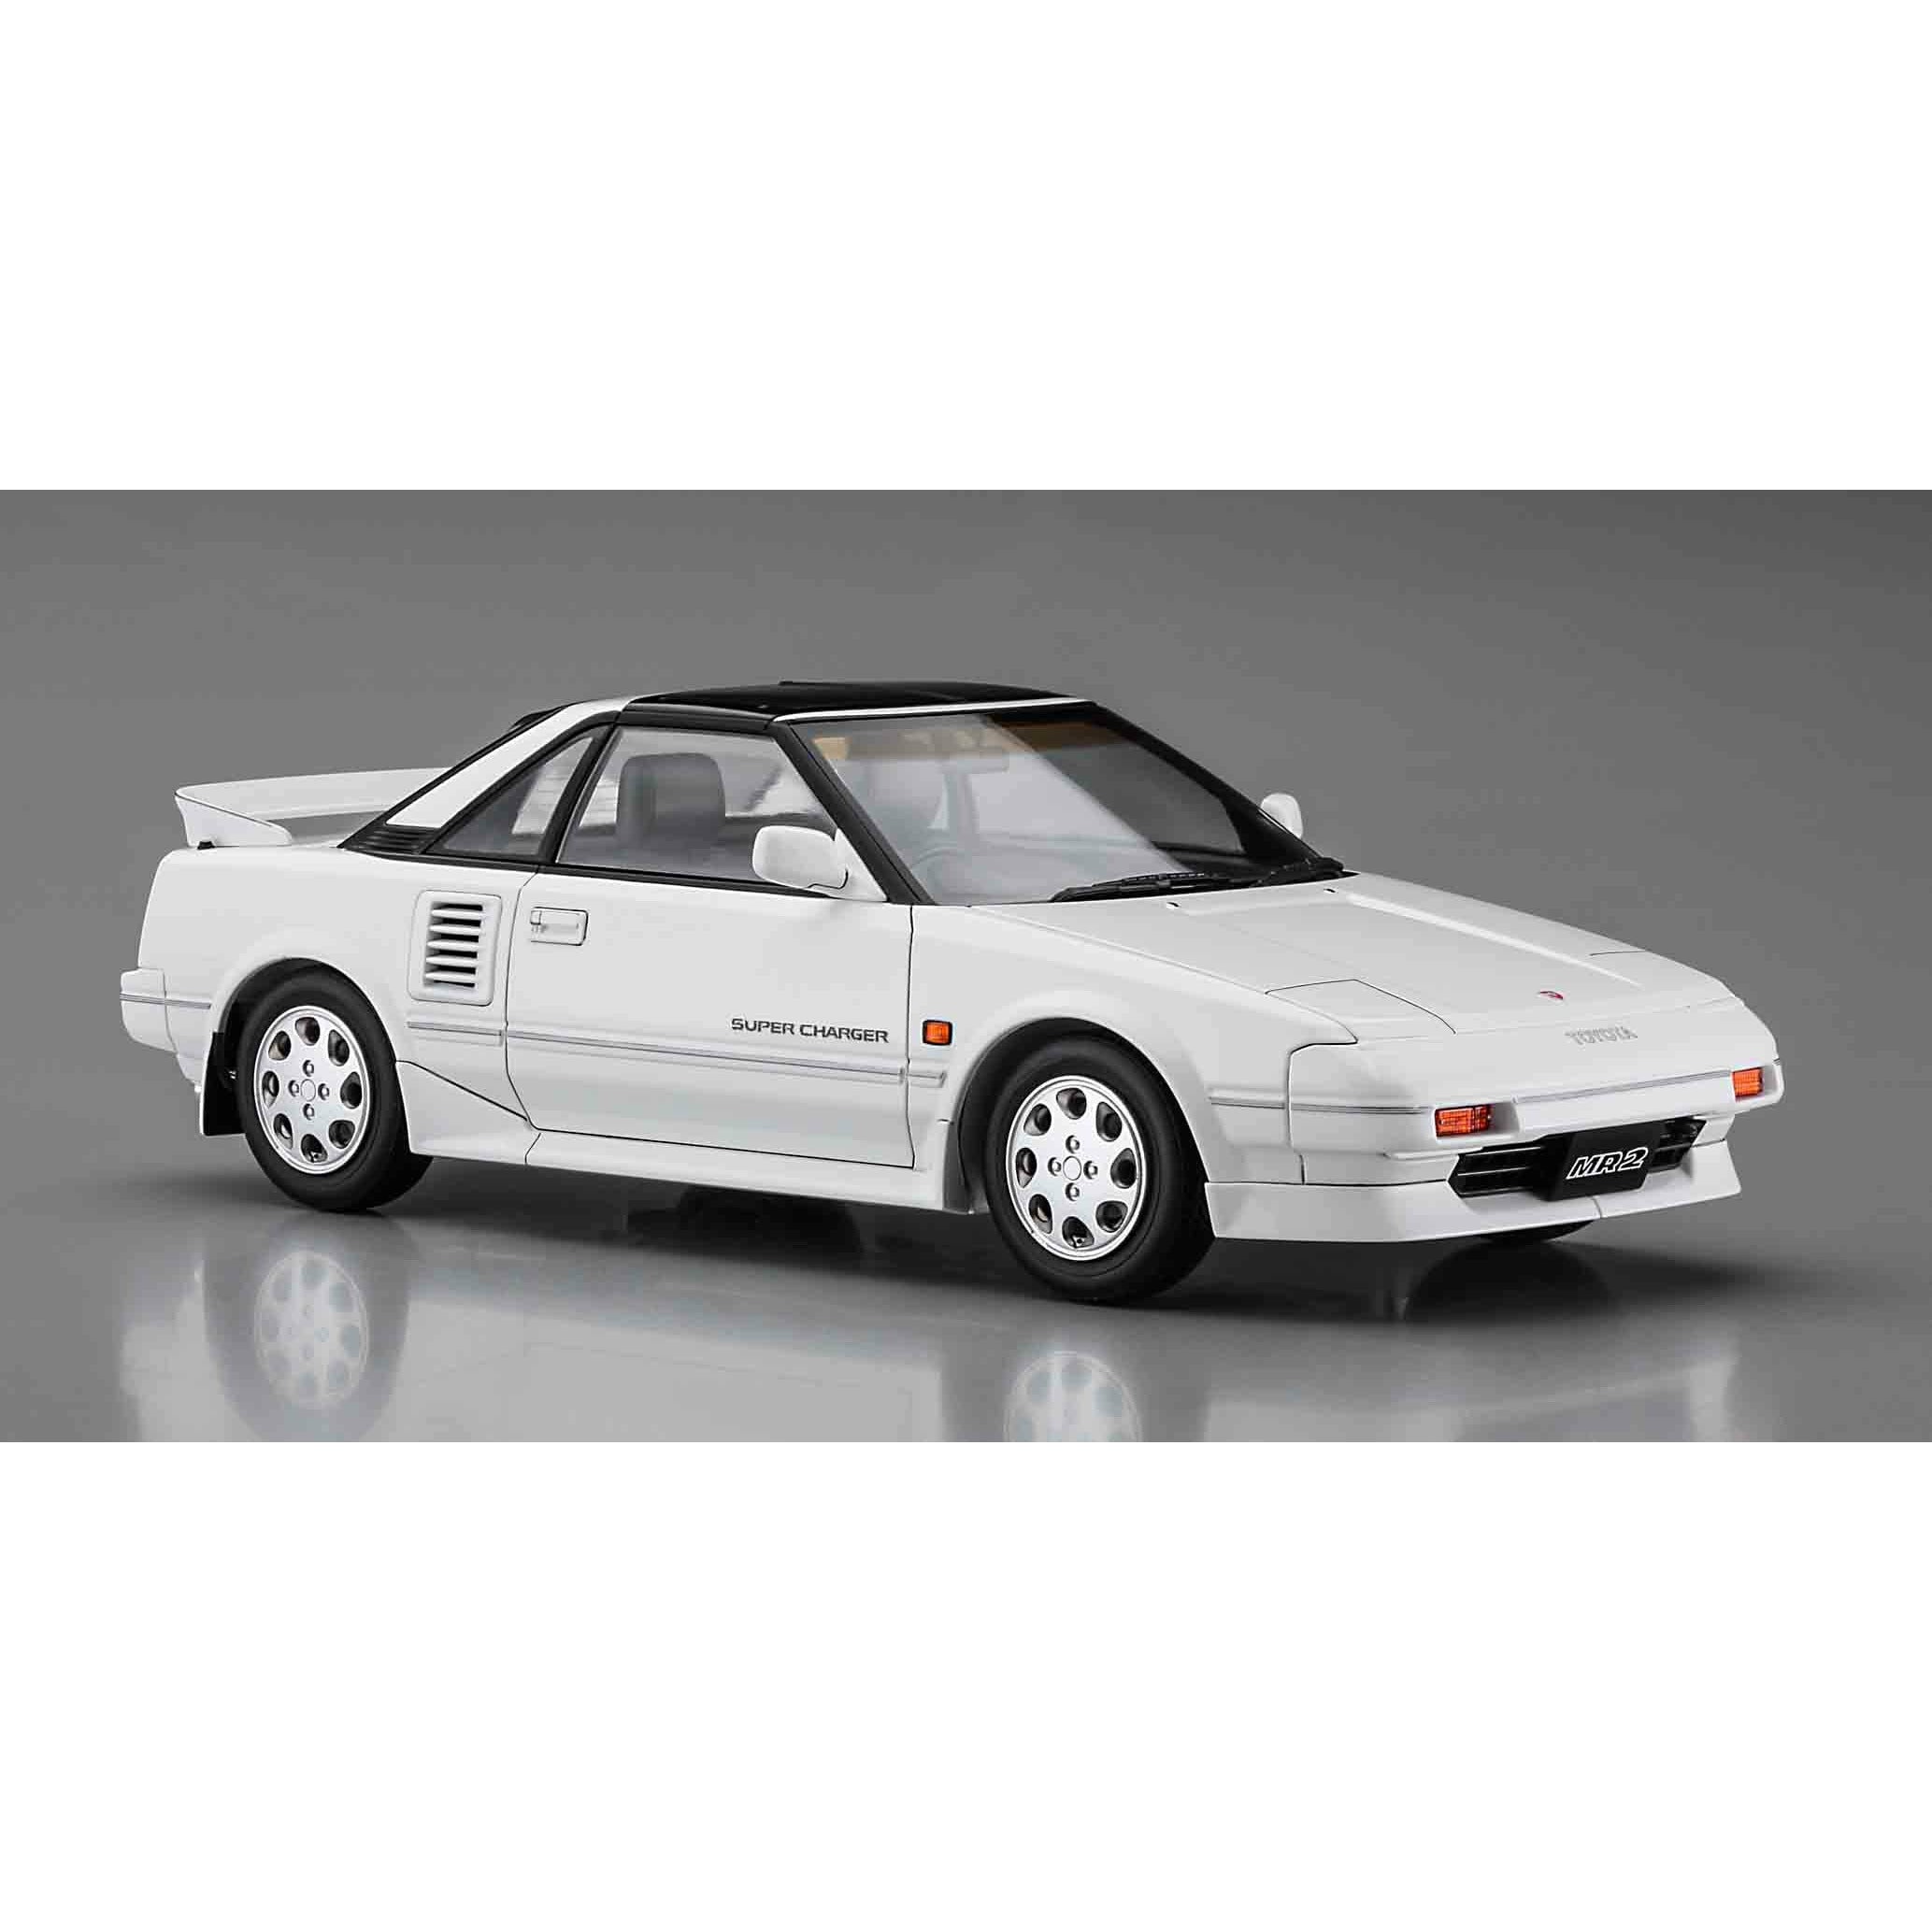 Toyota MR2 (AW11) Late Version G-Limited Super Charger (T Bar Roof) 1/24 #21145 by Hasegawa